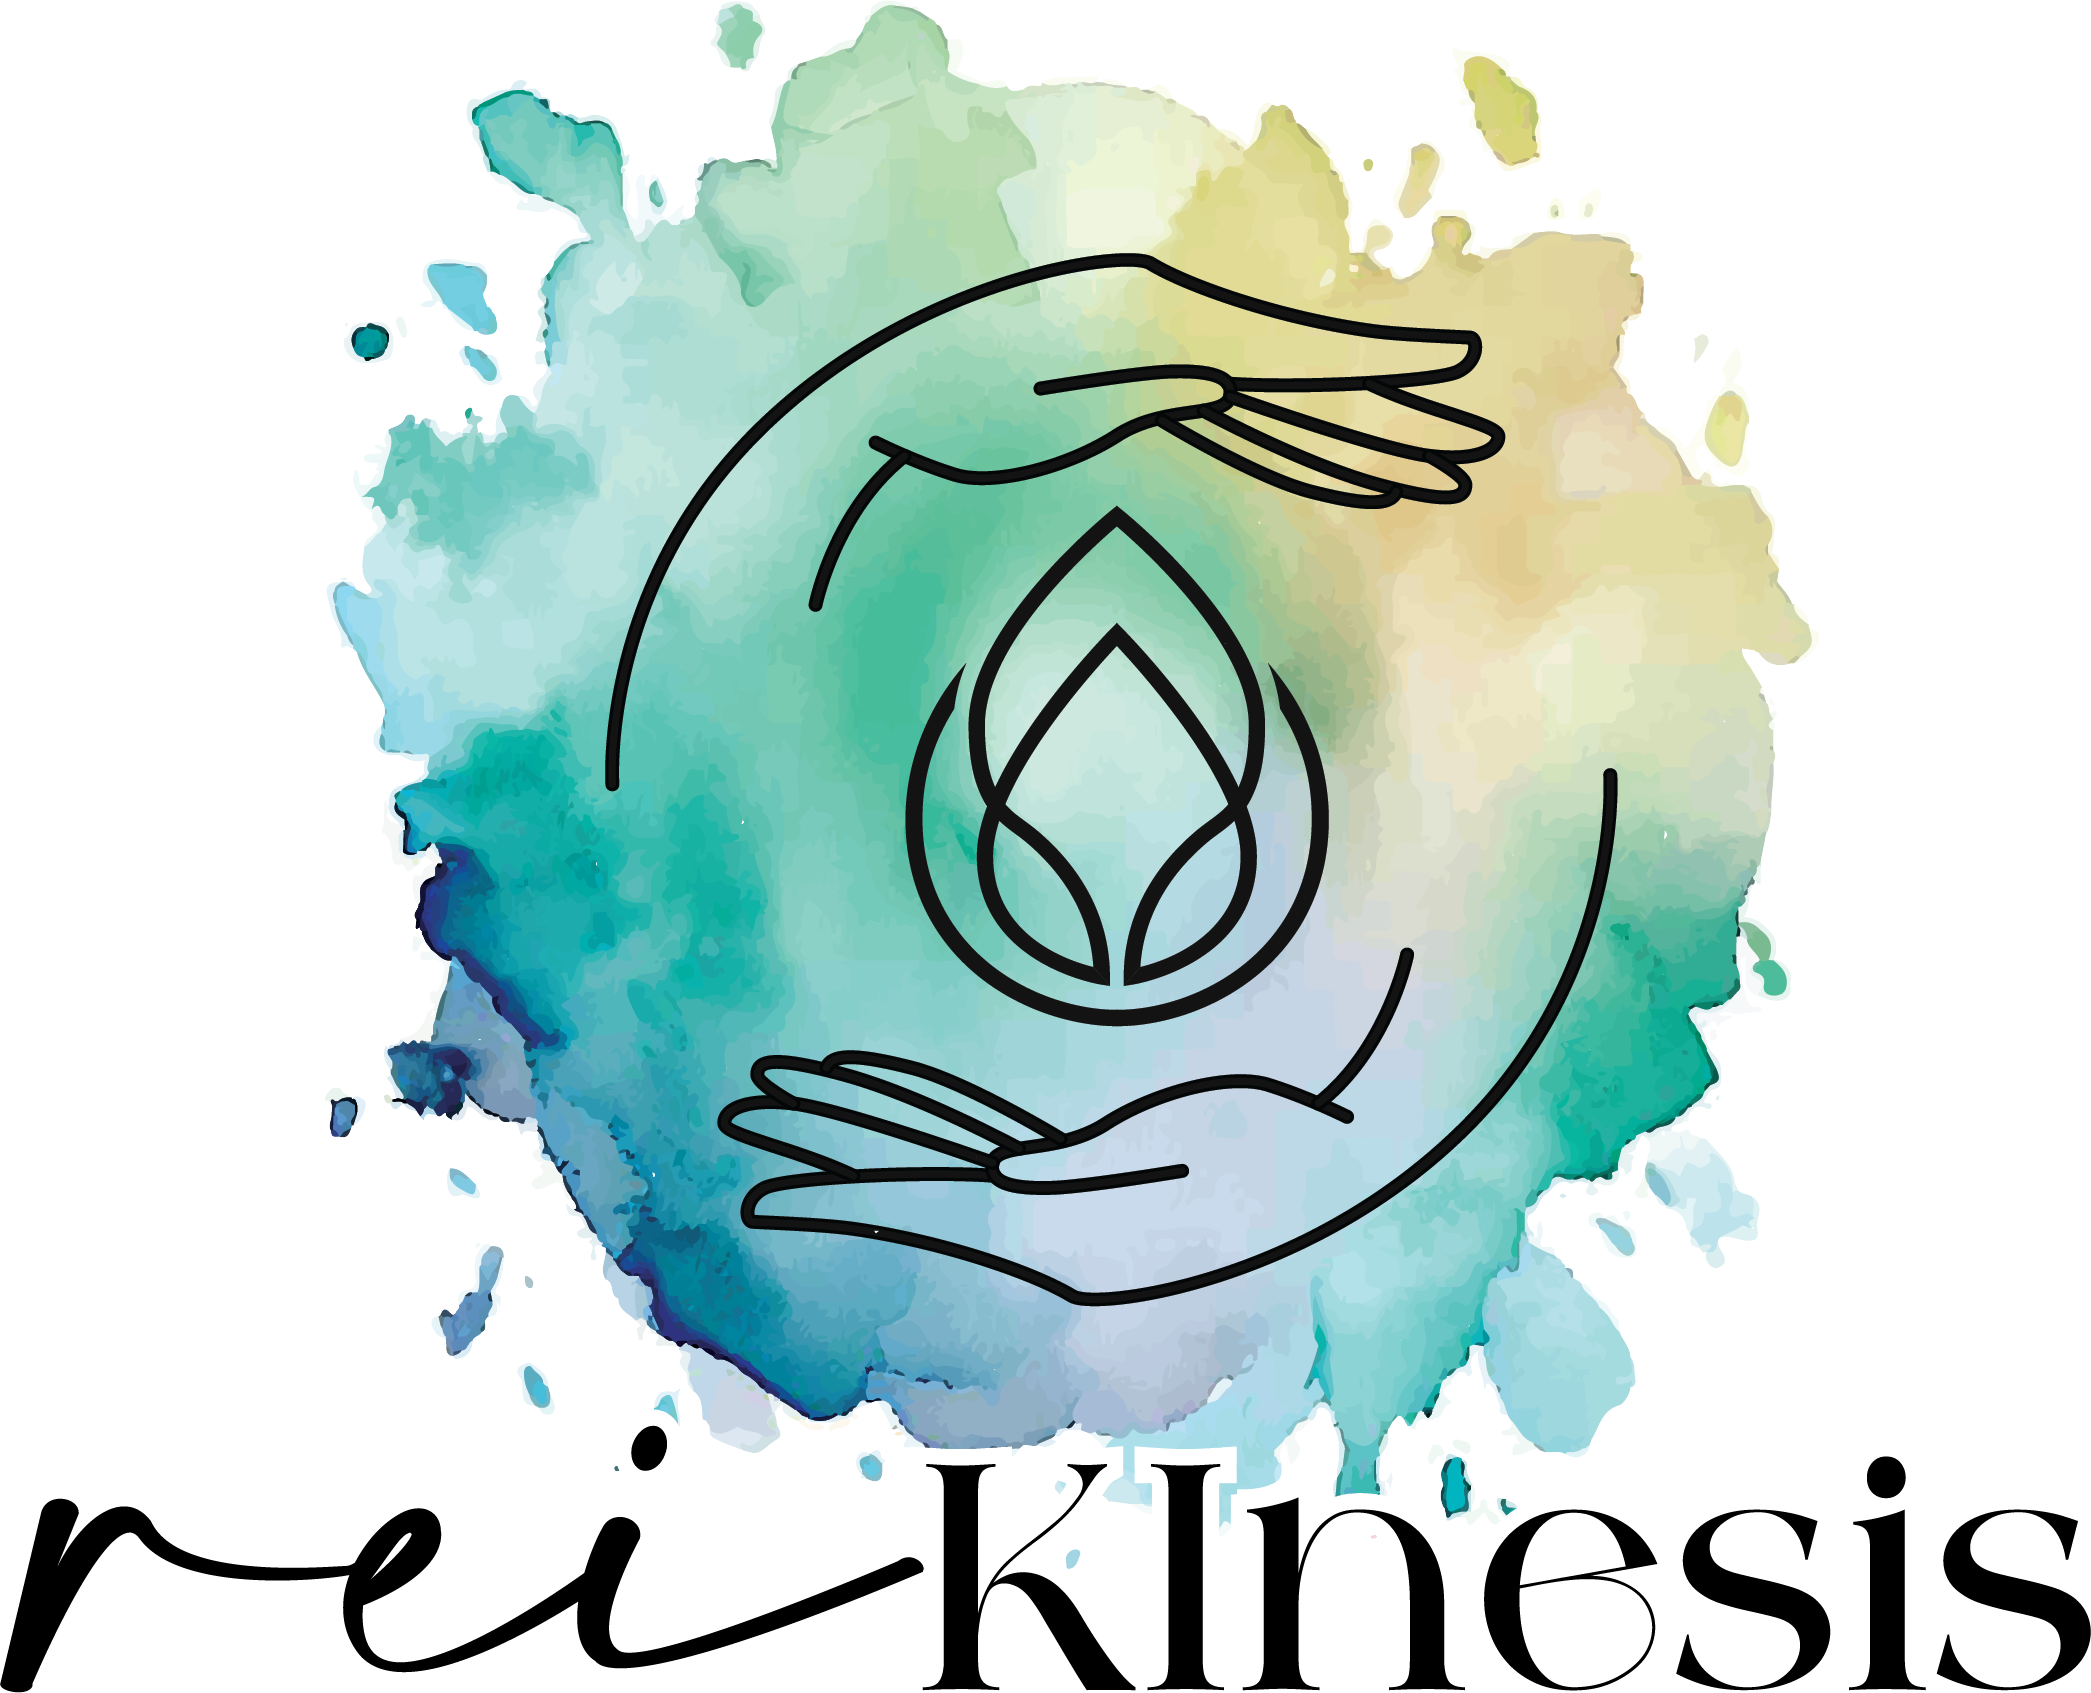 Curved hands around a lotus flower on a background of watercolor blues and greens